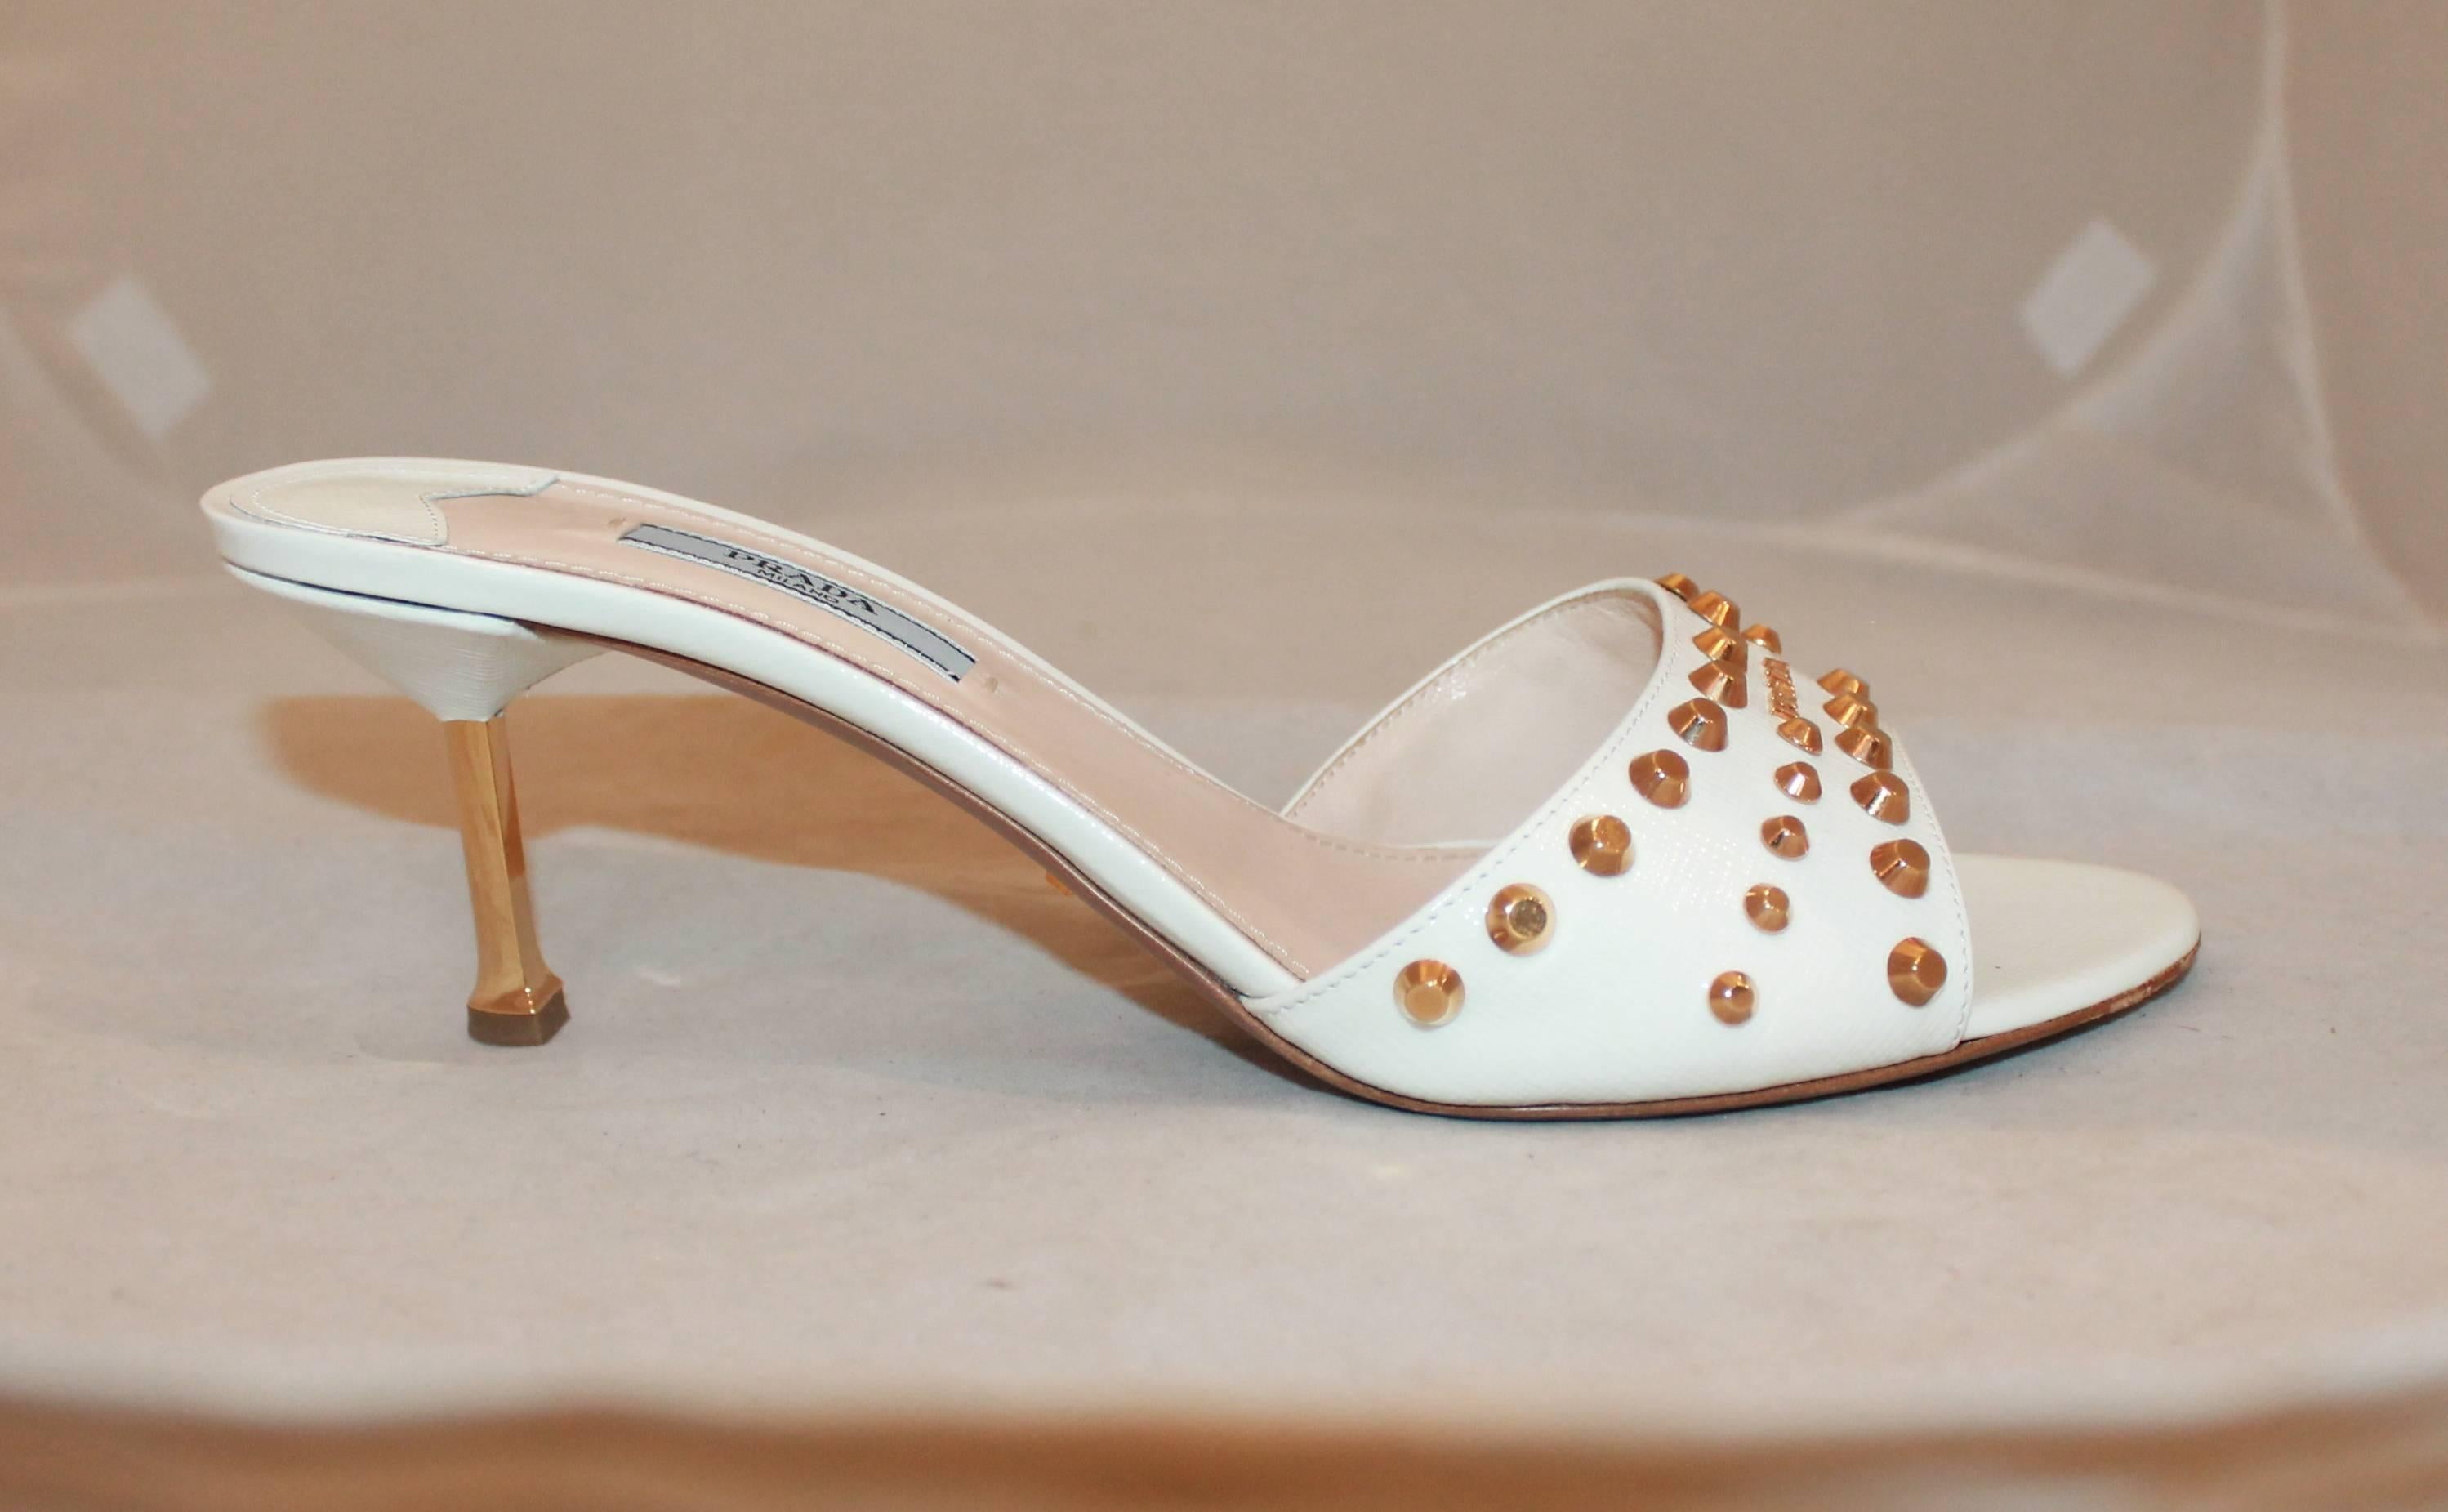 Prada White Saffiano Slides with Gold Heels, Gold Studs and Logo - 39.5. These white, Saffiano leather, Prada slides have a gold heel, gold studs, and a gold logo. They are have some wear on the bottom but are in excellent condition.